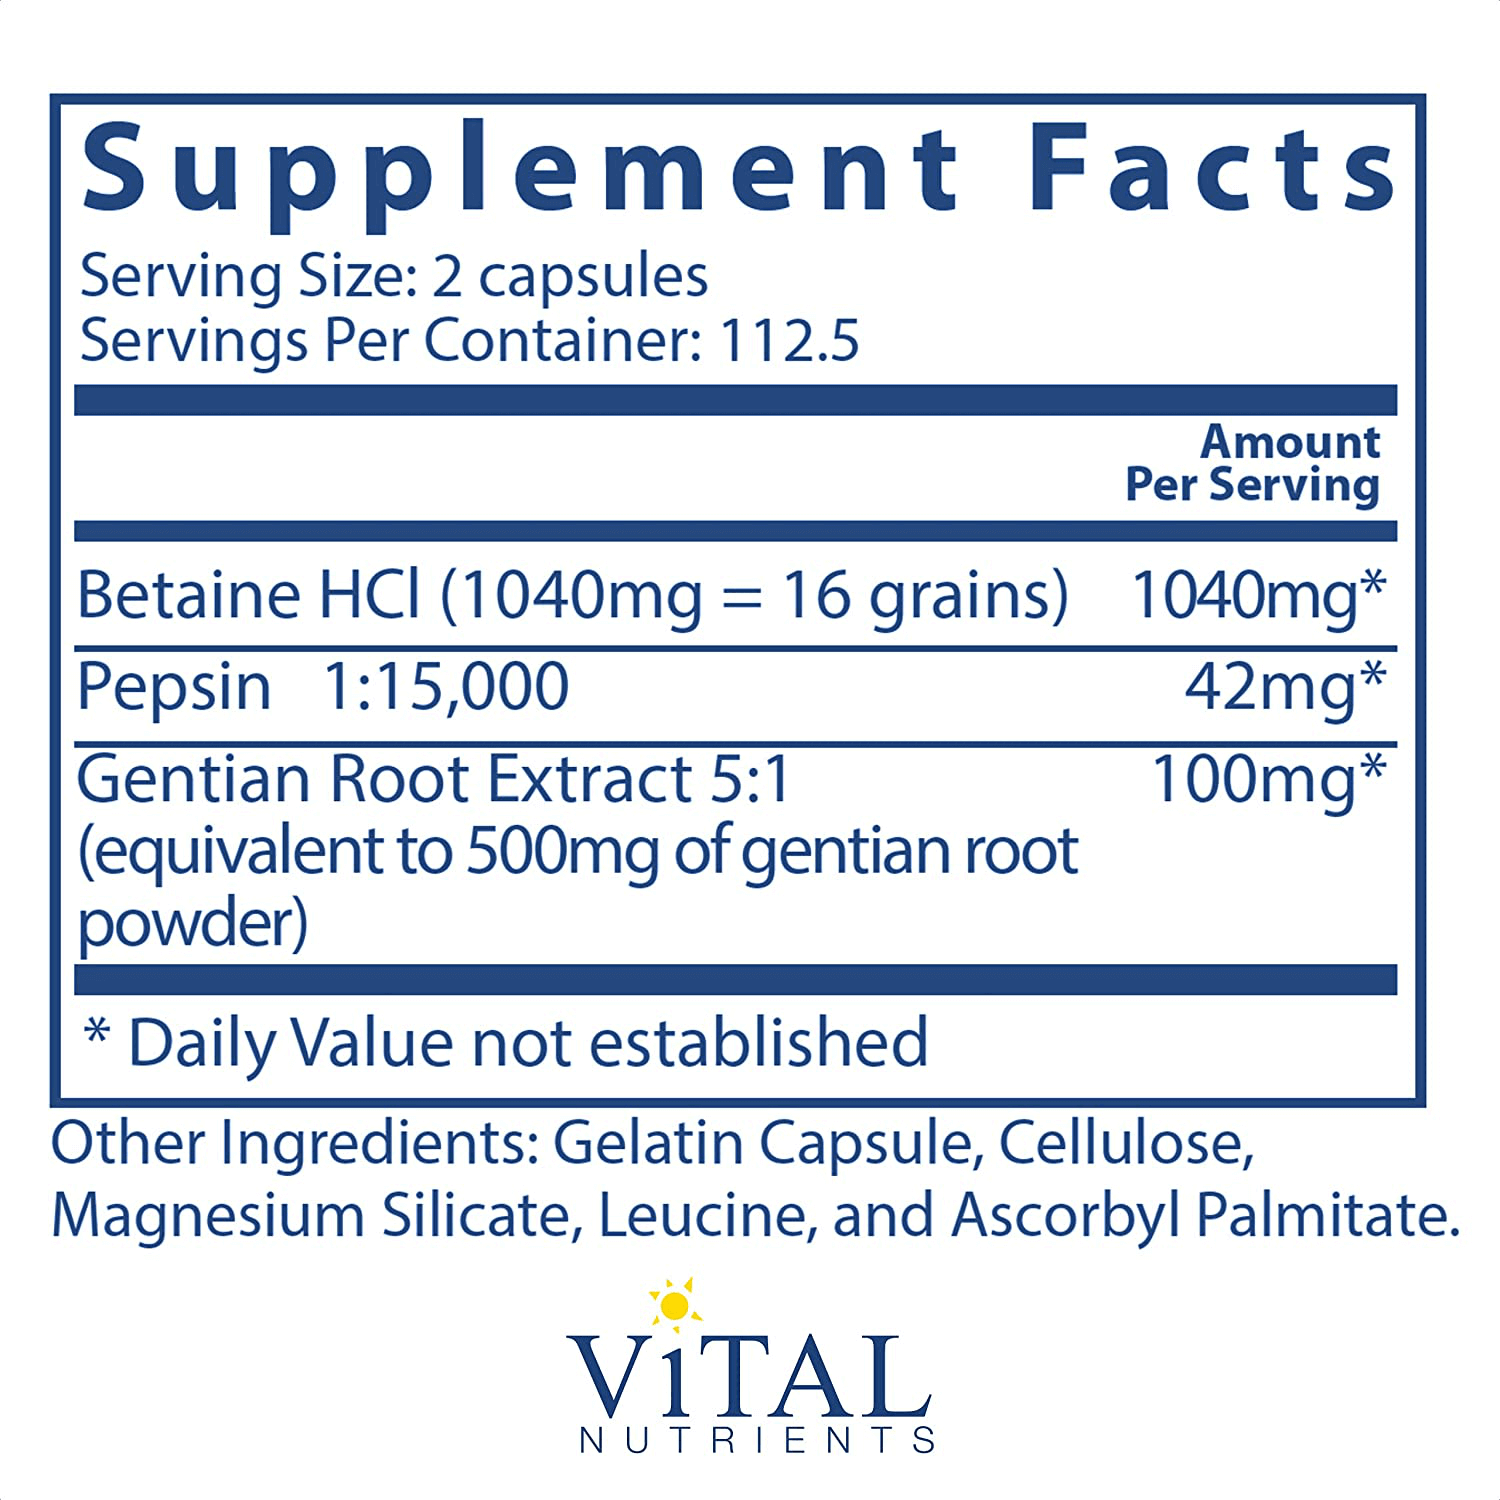 Vital Nutrients - Betaine HCL Pepsin and Gentian Root Extract - Powerful Digestive Support for the Stomach - Gluten Free - 225 Capsules per Bottle - vitamenstore.com